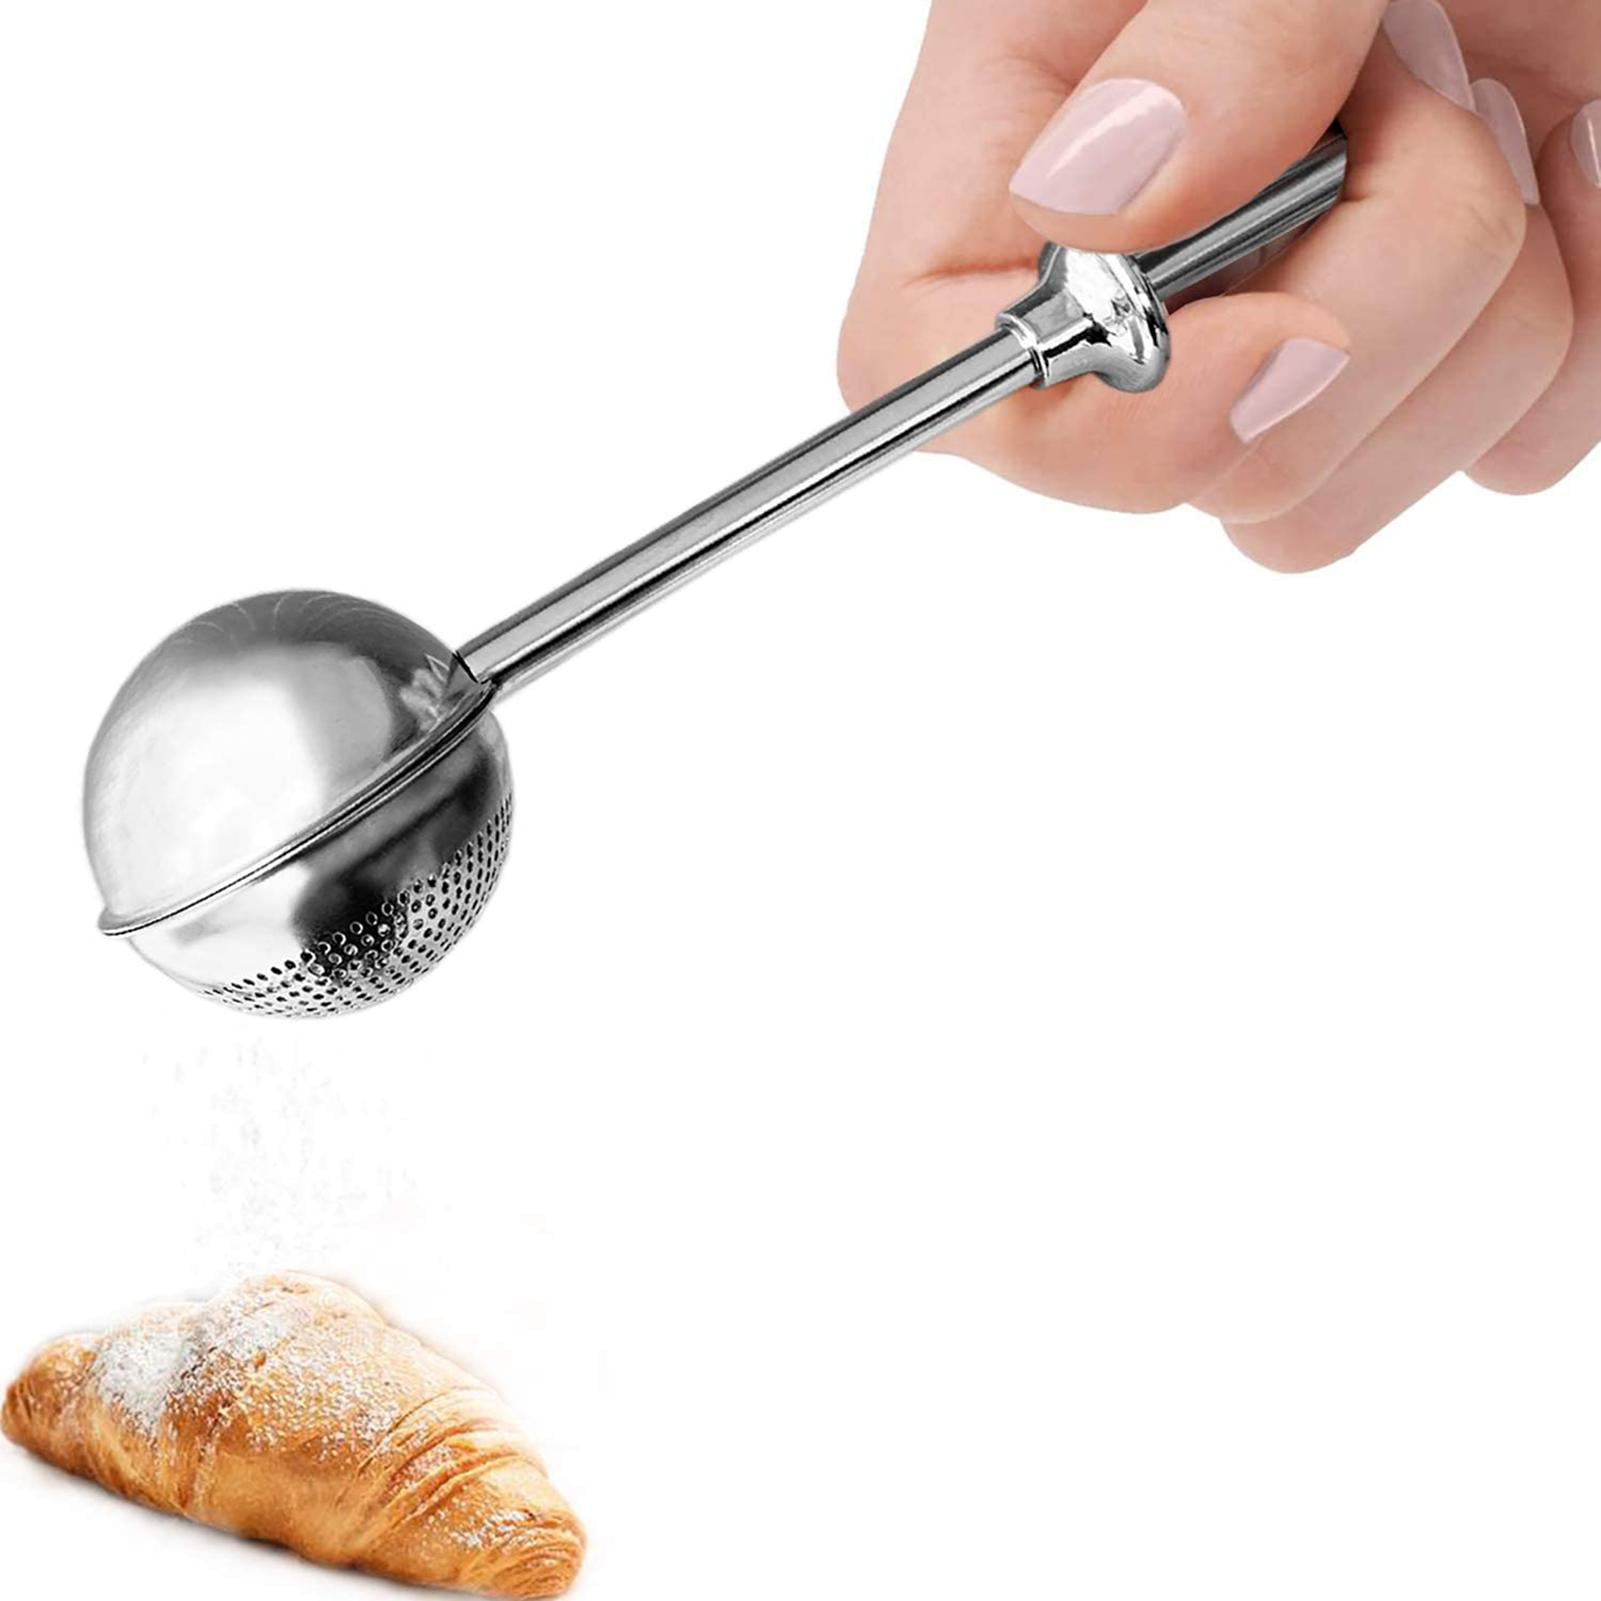 Lauon Sugar Shaker Duster Dusting Wand for Powdered Sugar and Spices Flour Duster for Baking Stainless Steel Sugar Sifter 